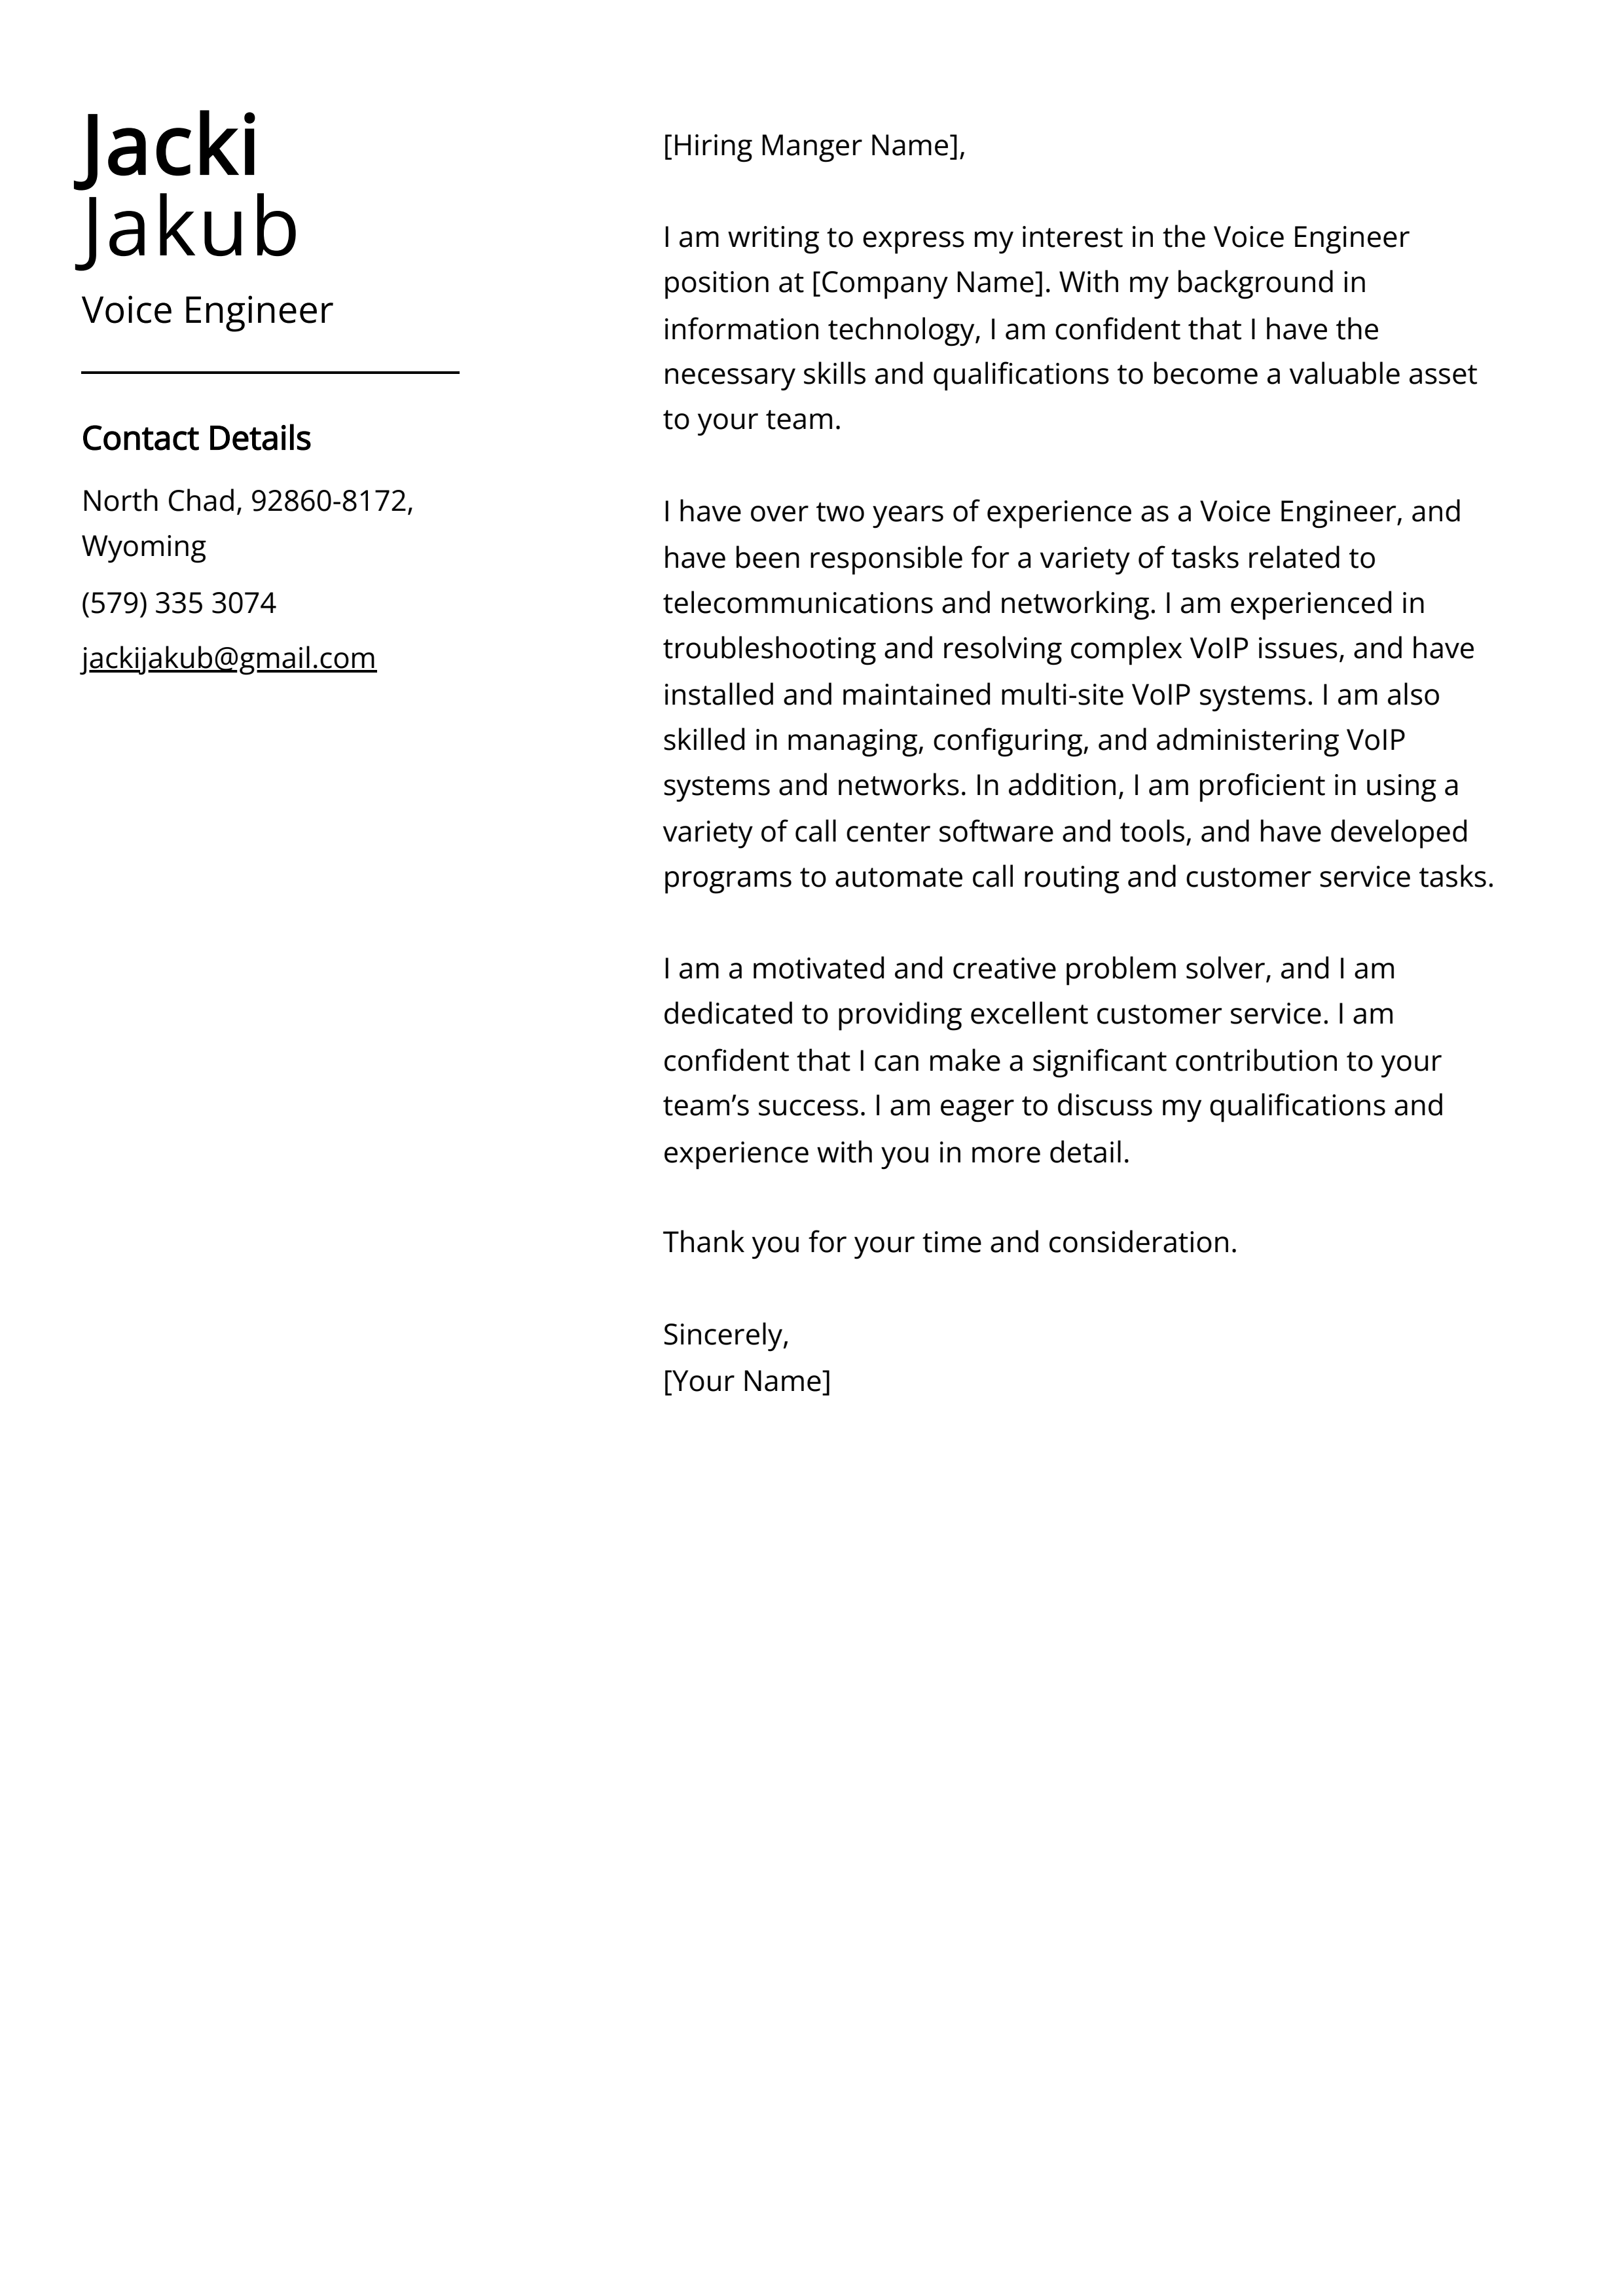 Voice Engineer Cover Letter Example